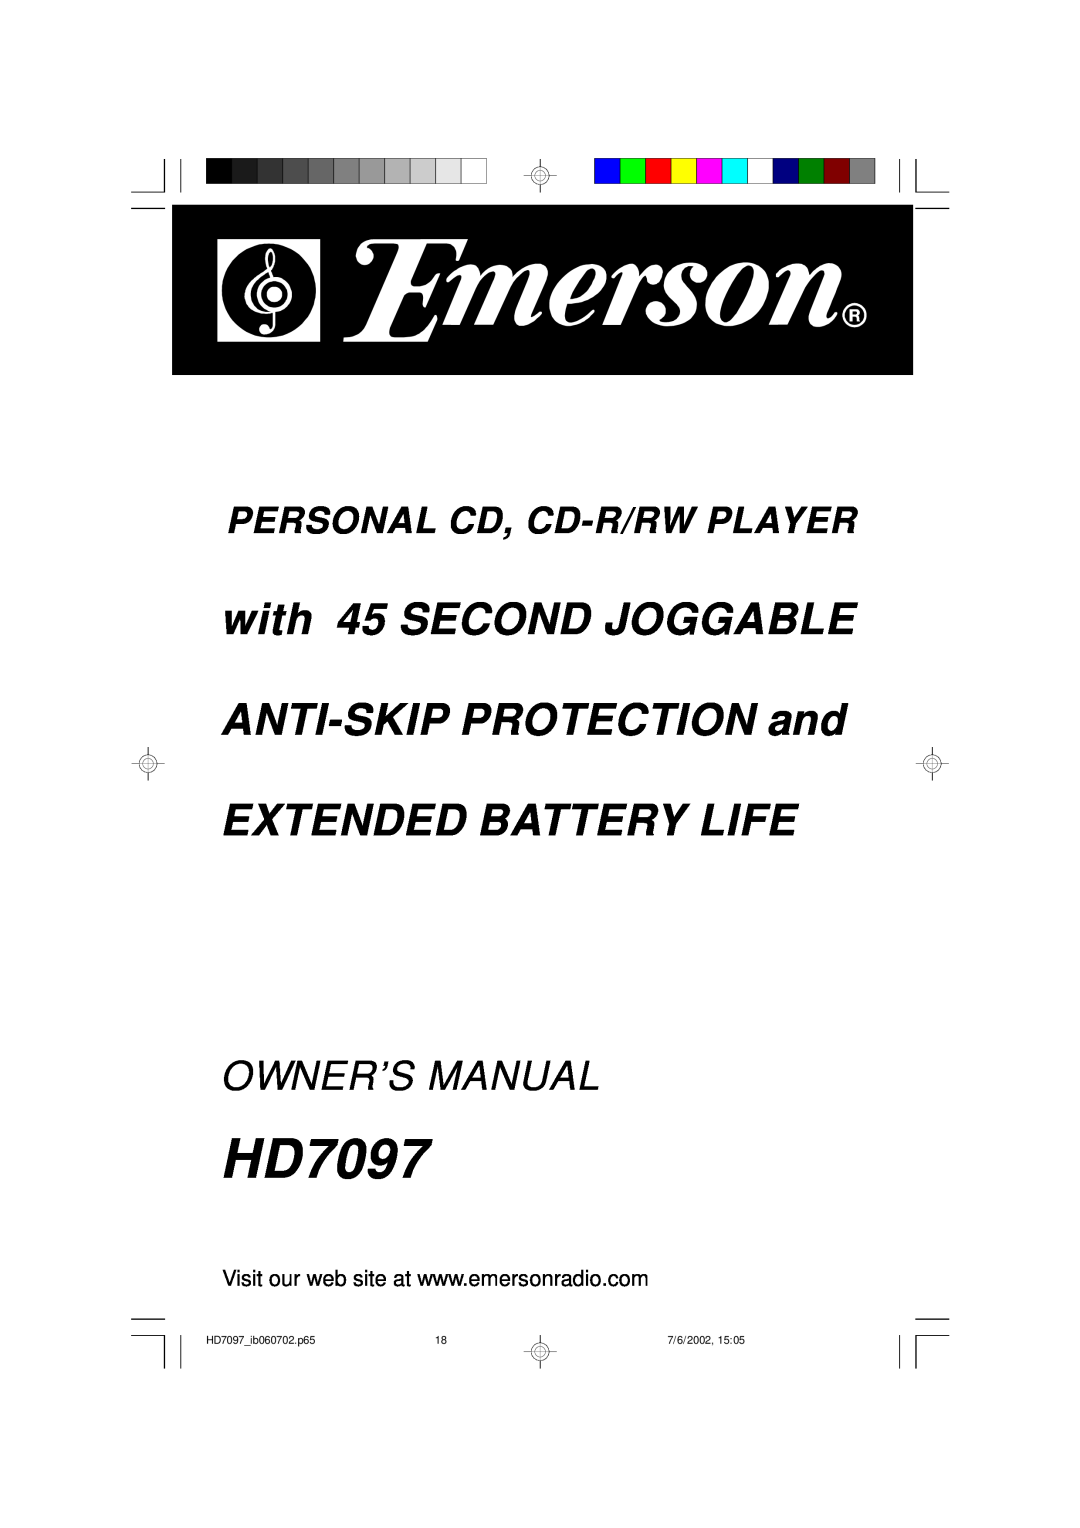 Emerson owner manual with 45 SECOND JOGGABLE ANTI-SKIP PROTECTION and, Extended Battery Life, HD7097ib060702.p65 